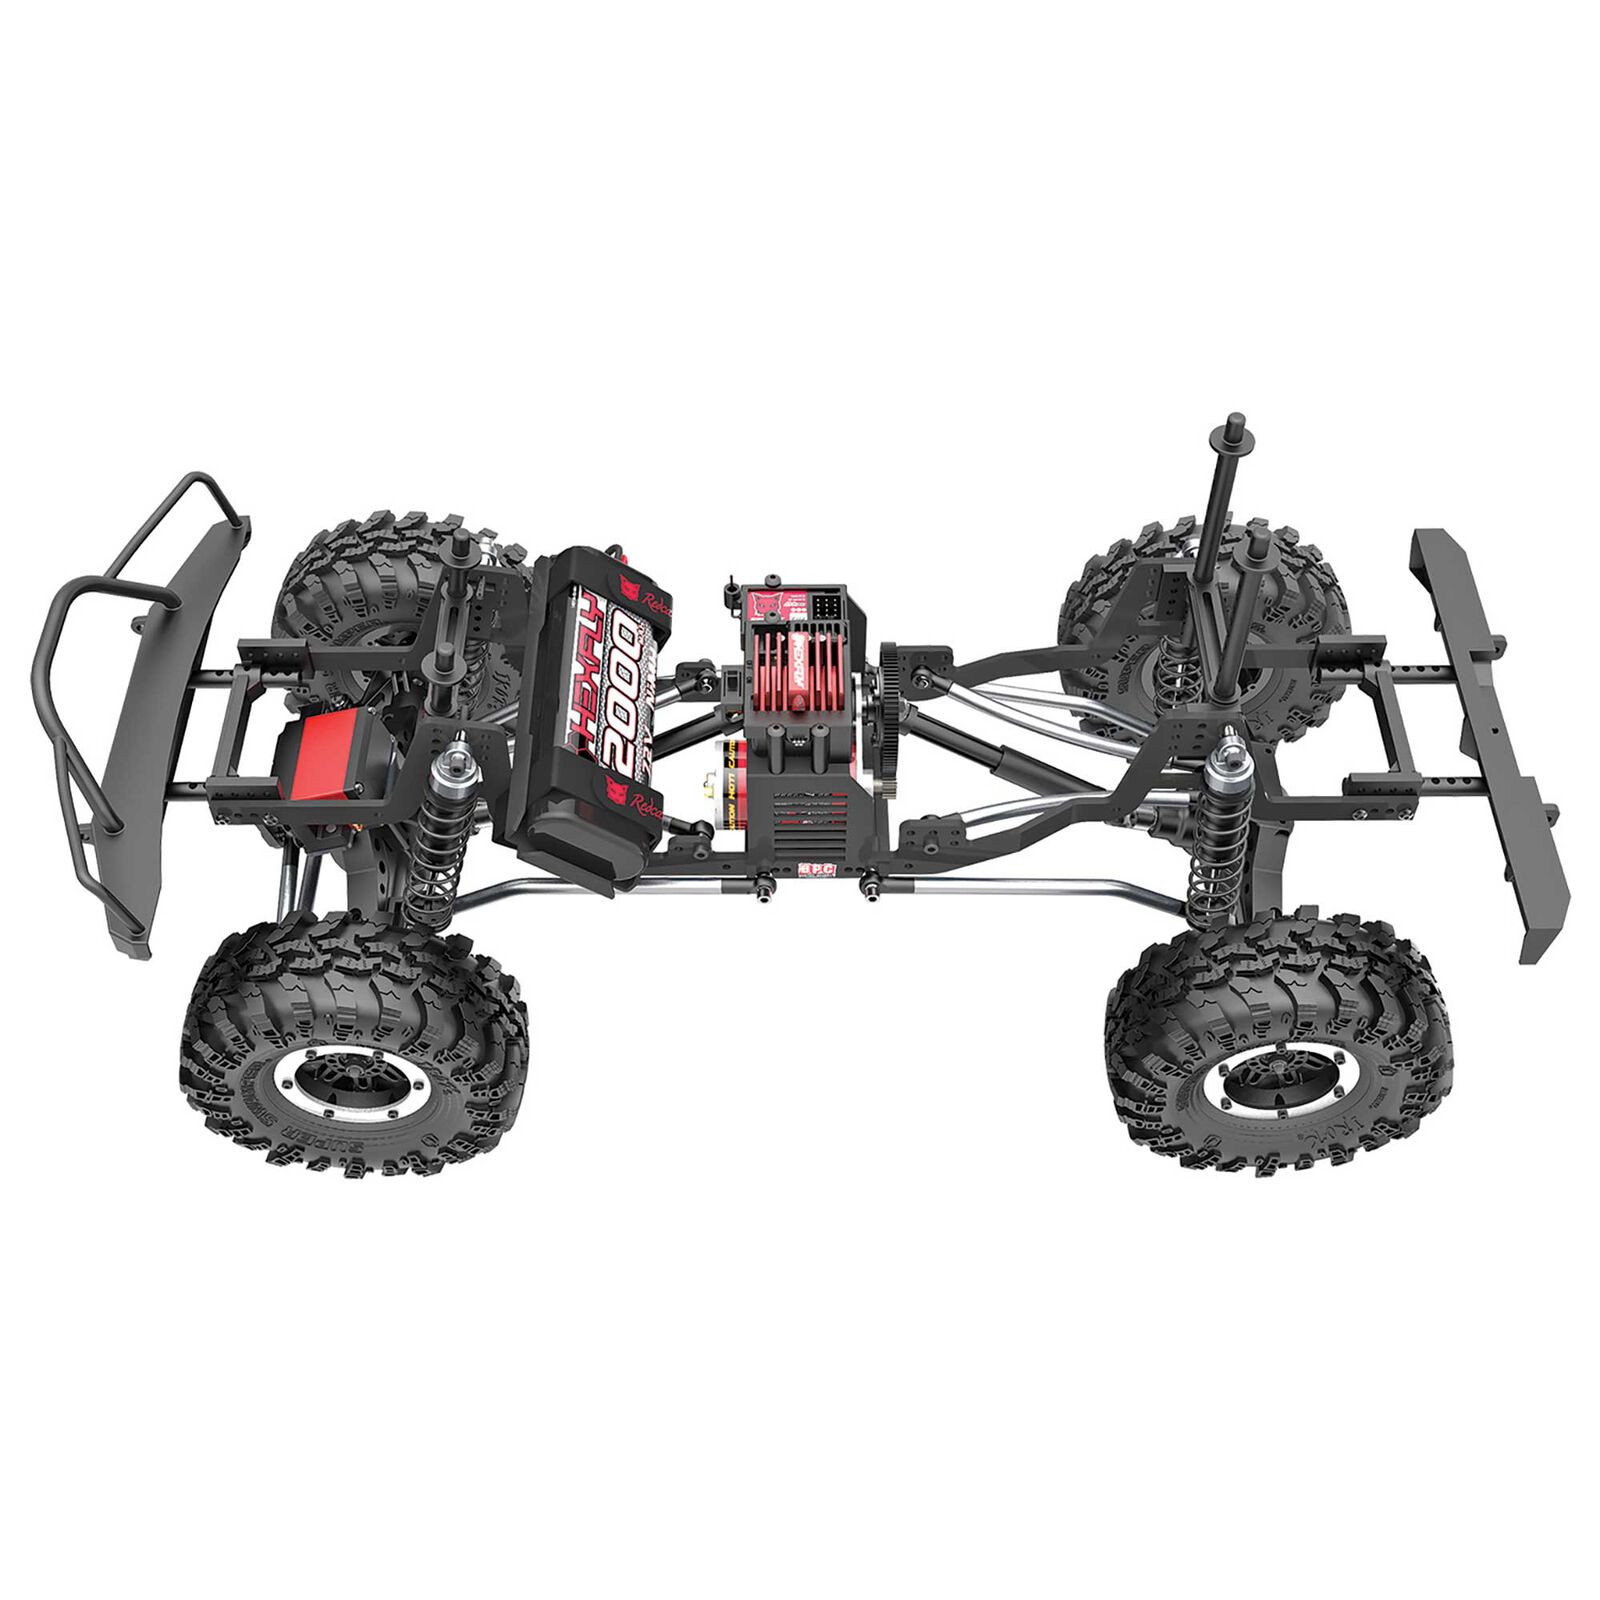 Redcat Racing 1/10 Everest Gen7 Sport 4WD Crawler Brushed RTR, Silver